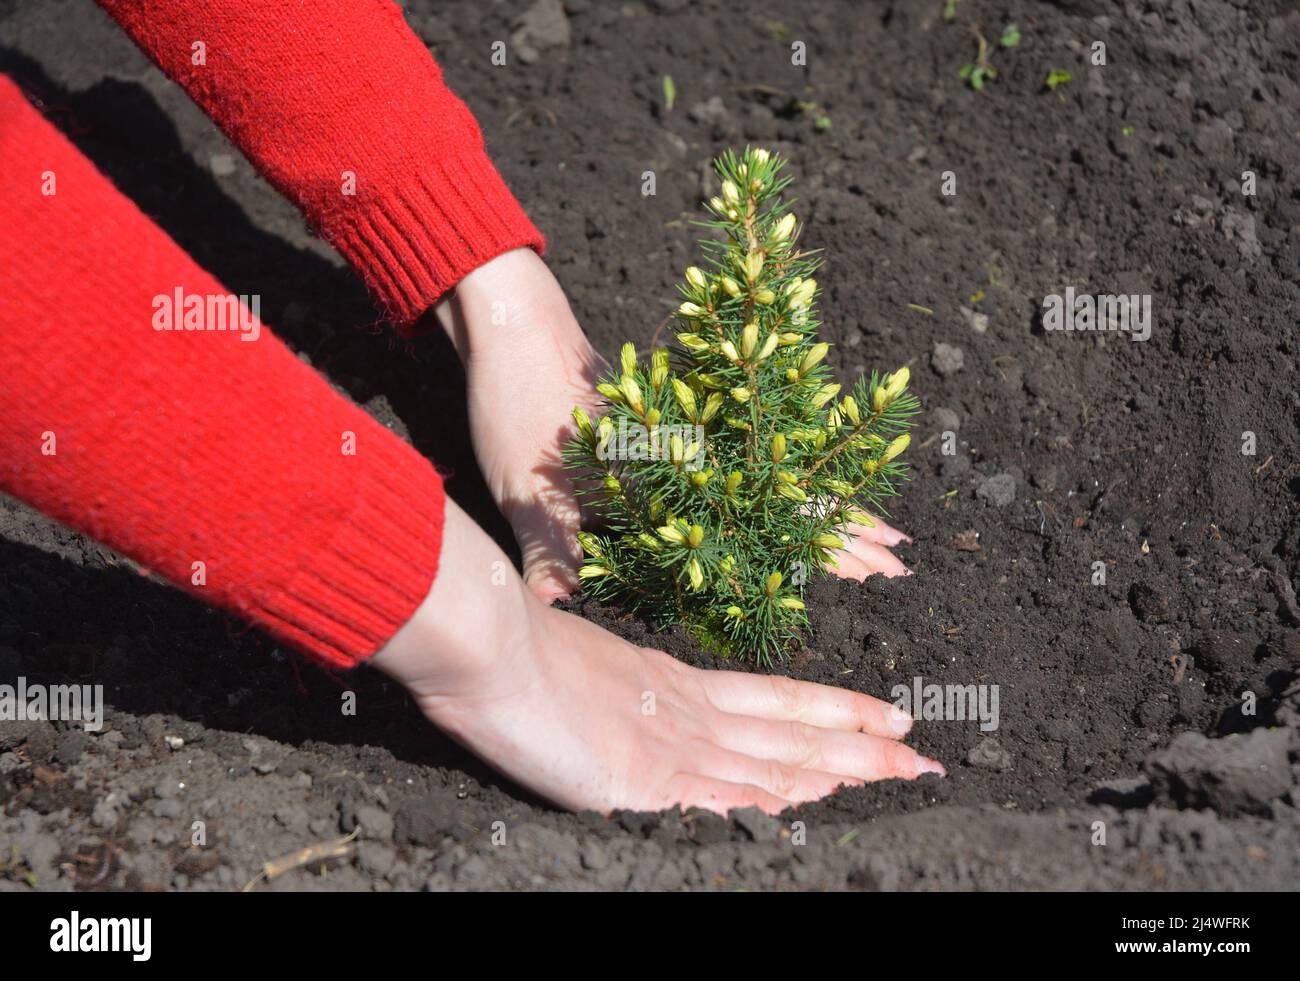 A gardener is planting a little Picea glauca conica, dwarf Alberta spruce with yellow endings. Growing a picea glauca conica with golden leaves from a Stock Photo